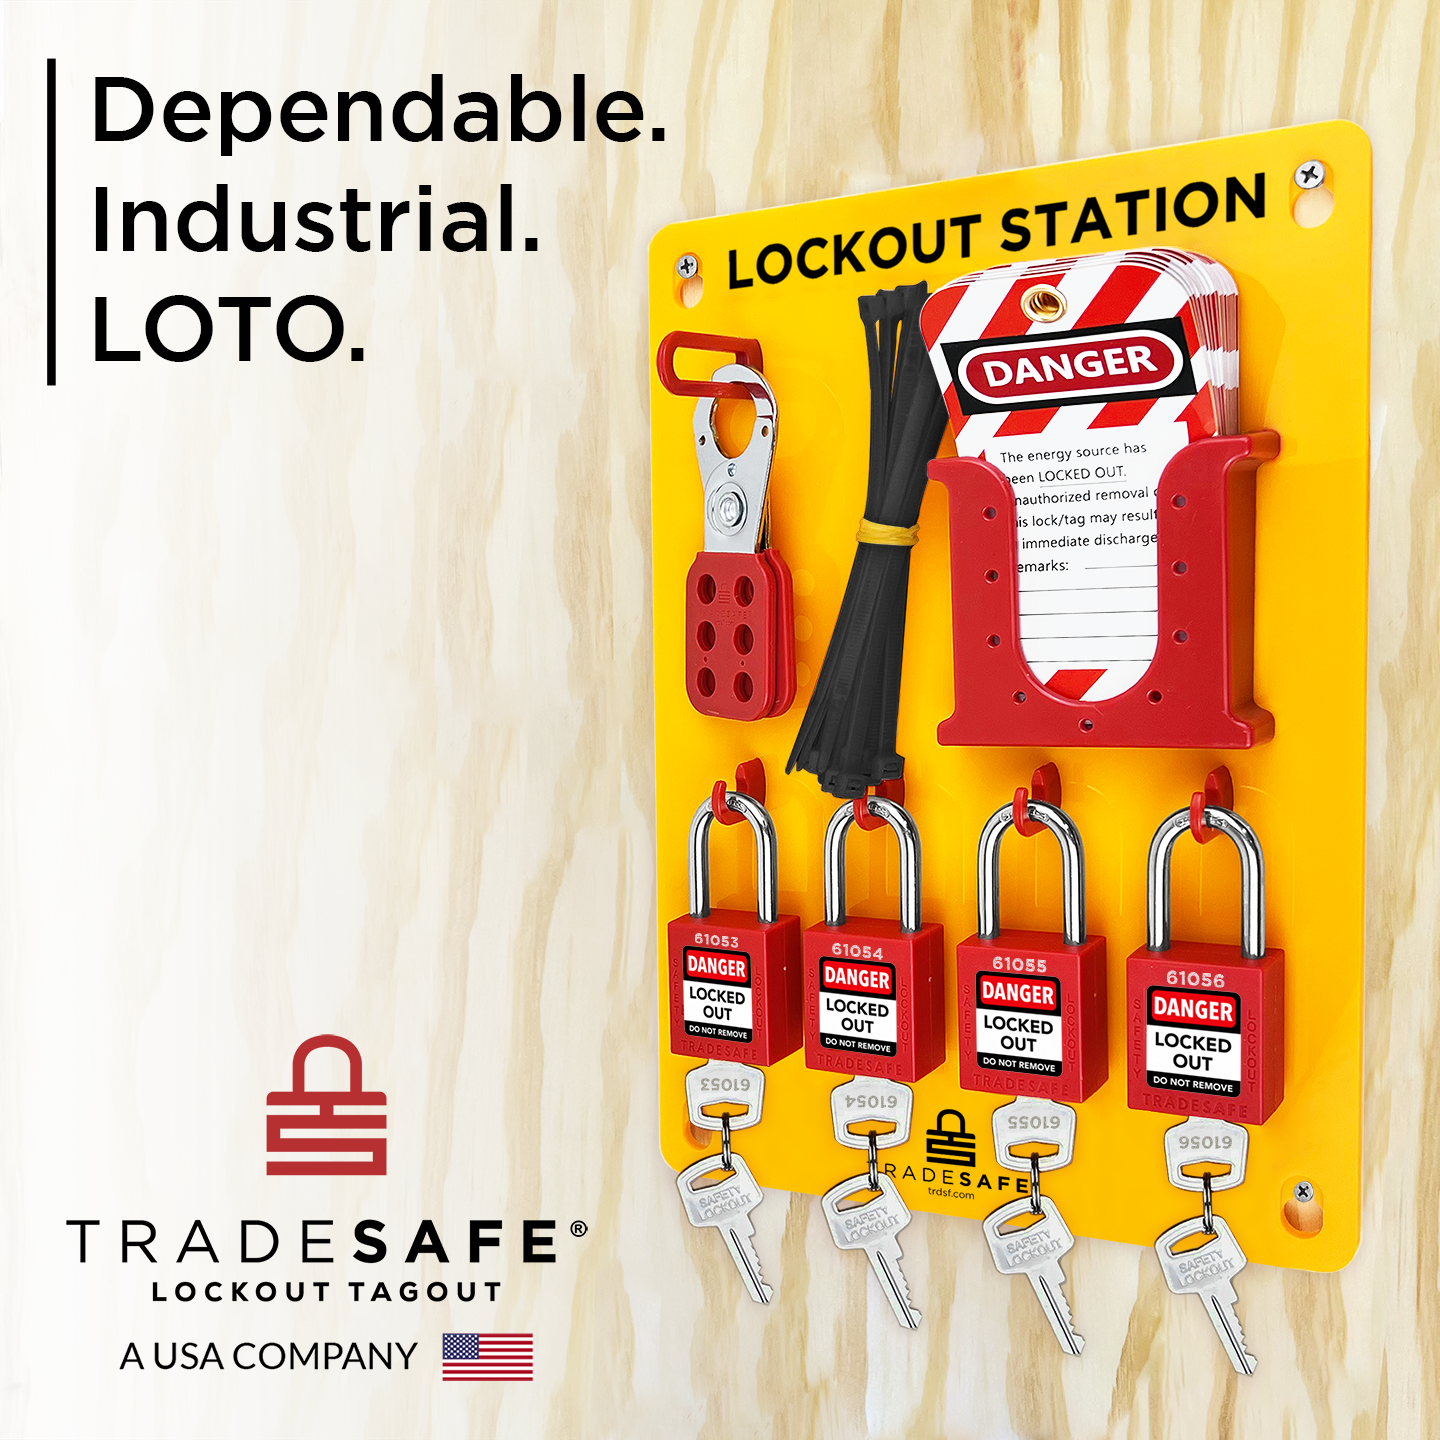 tradesafe: dependable. industrial. loto.